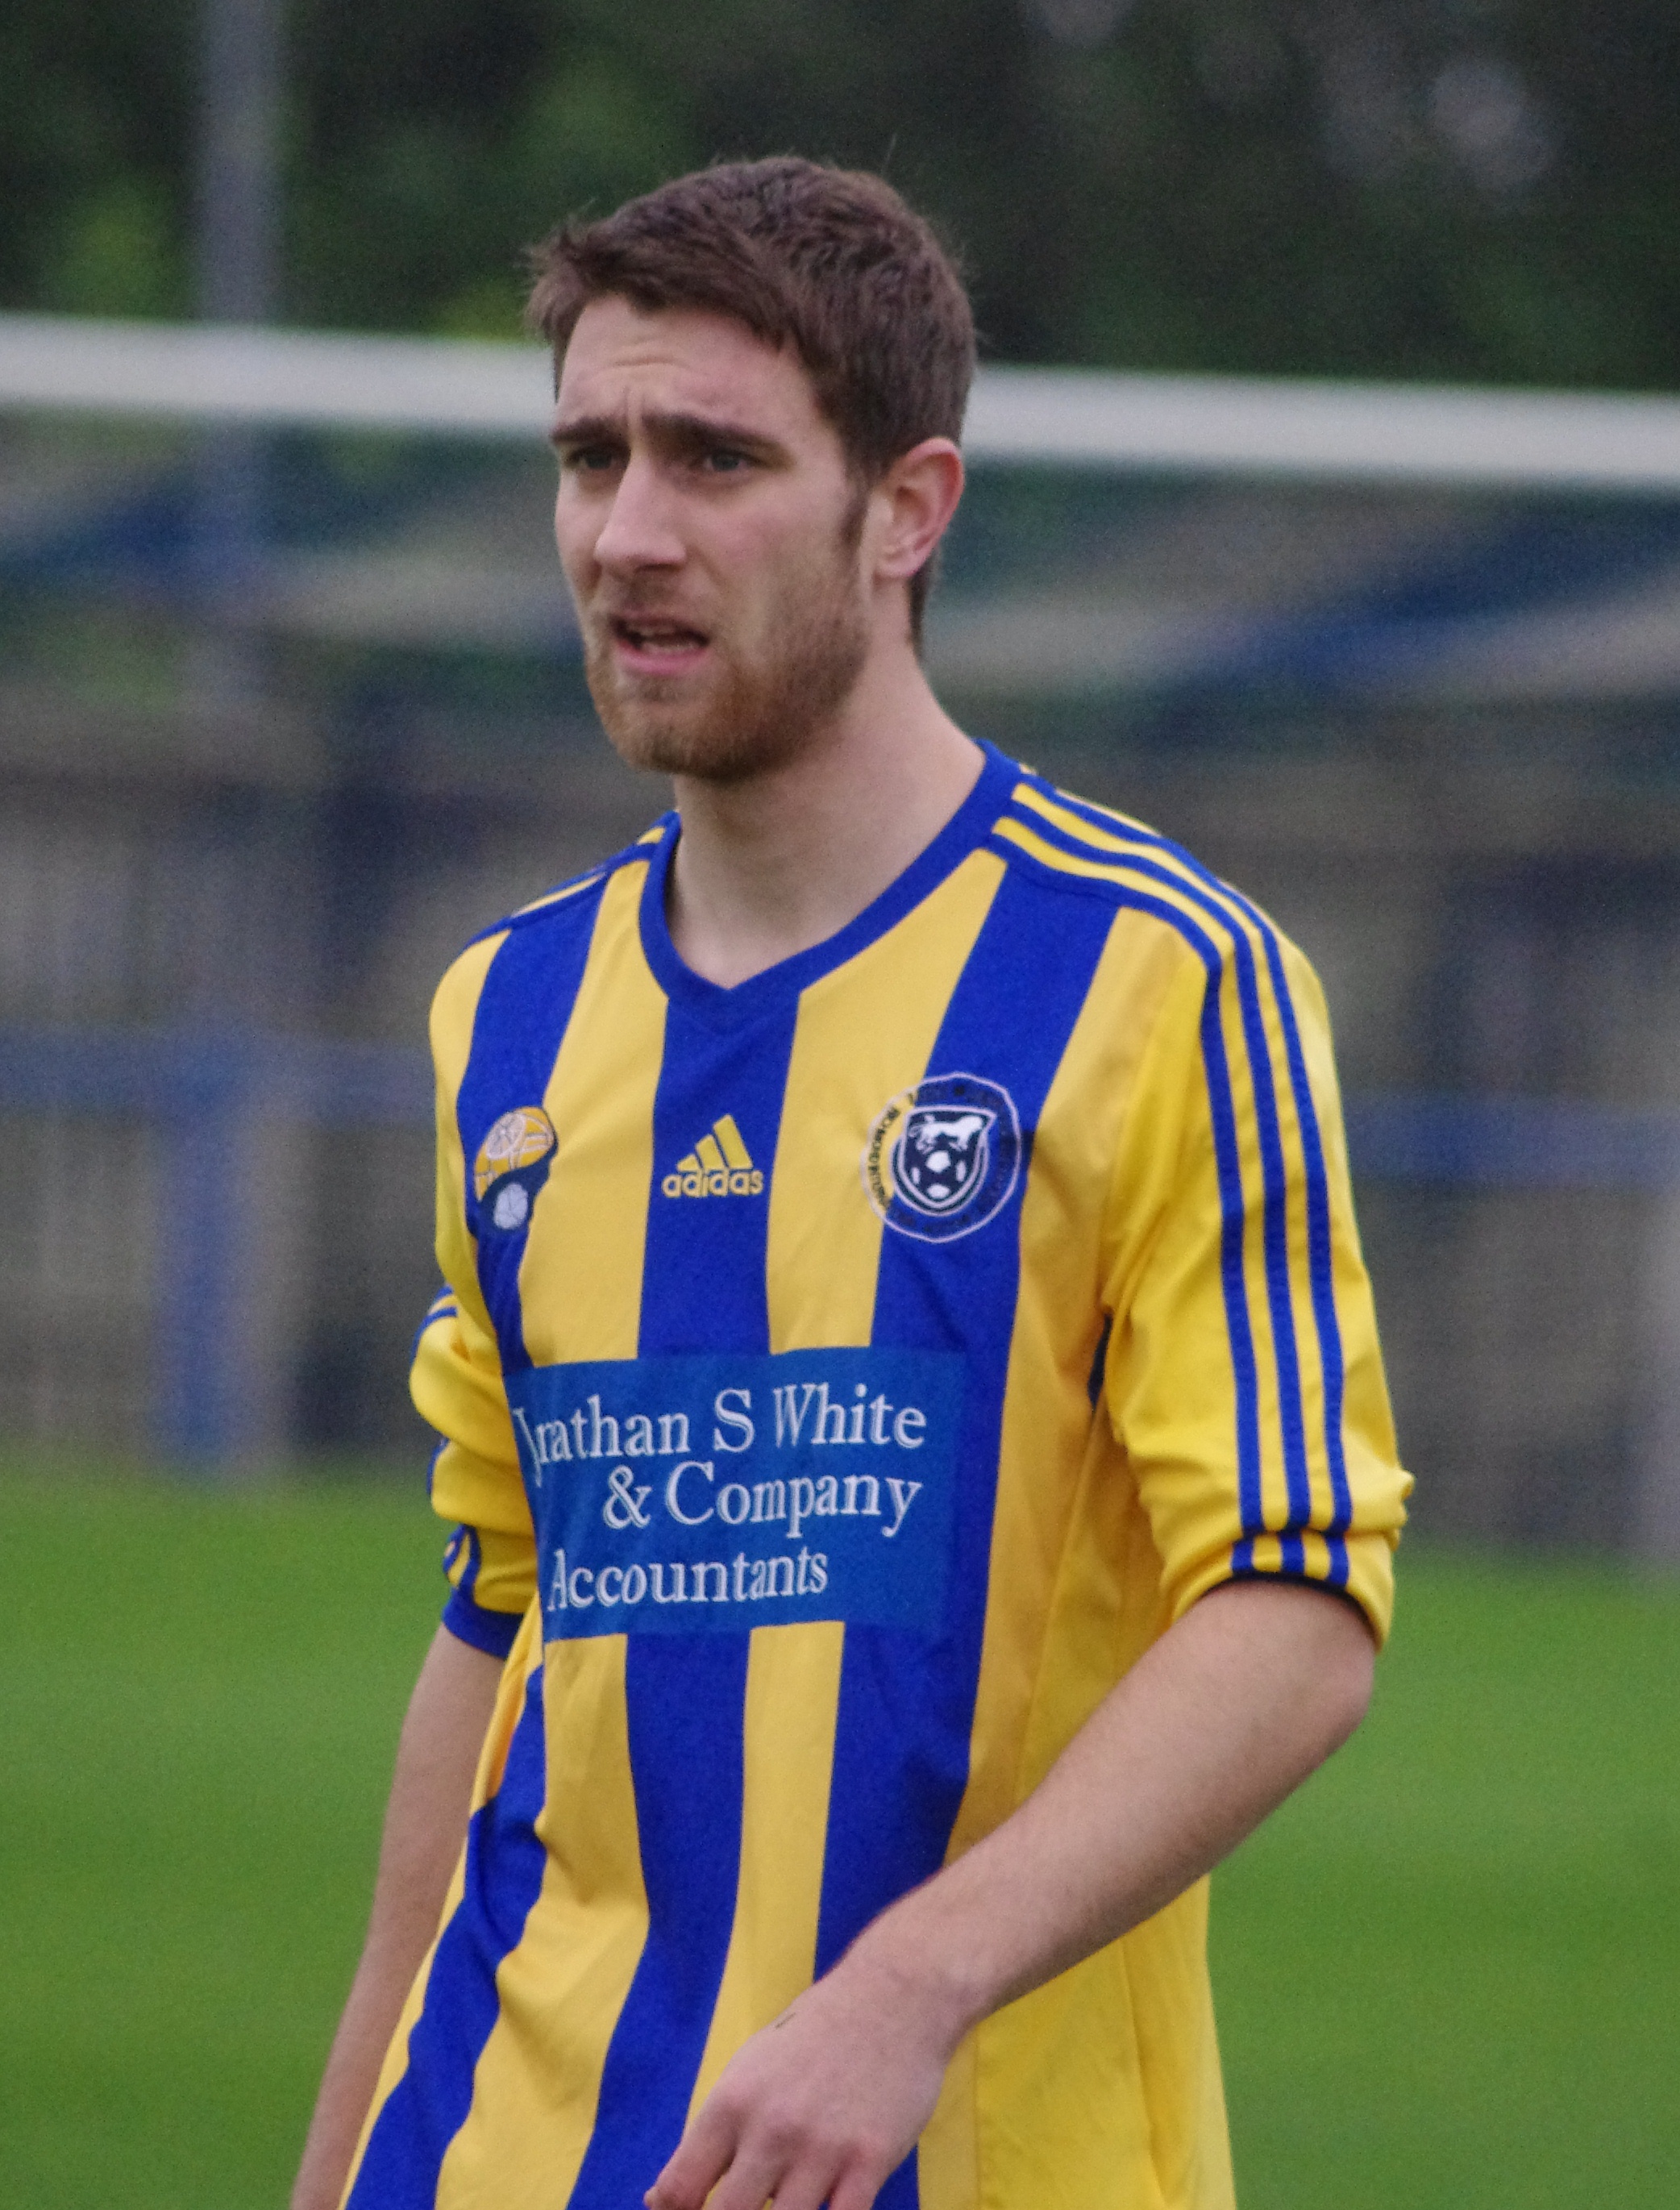 New Garforth Town captain Andy Hawksworth is a natural leader, according to Graham Nicholas